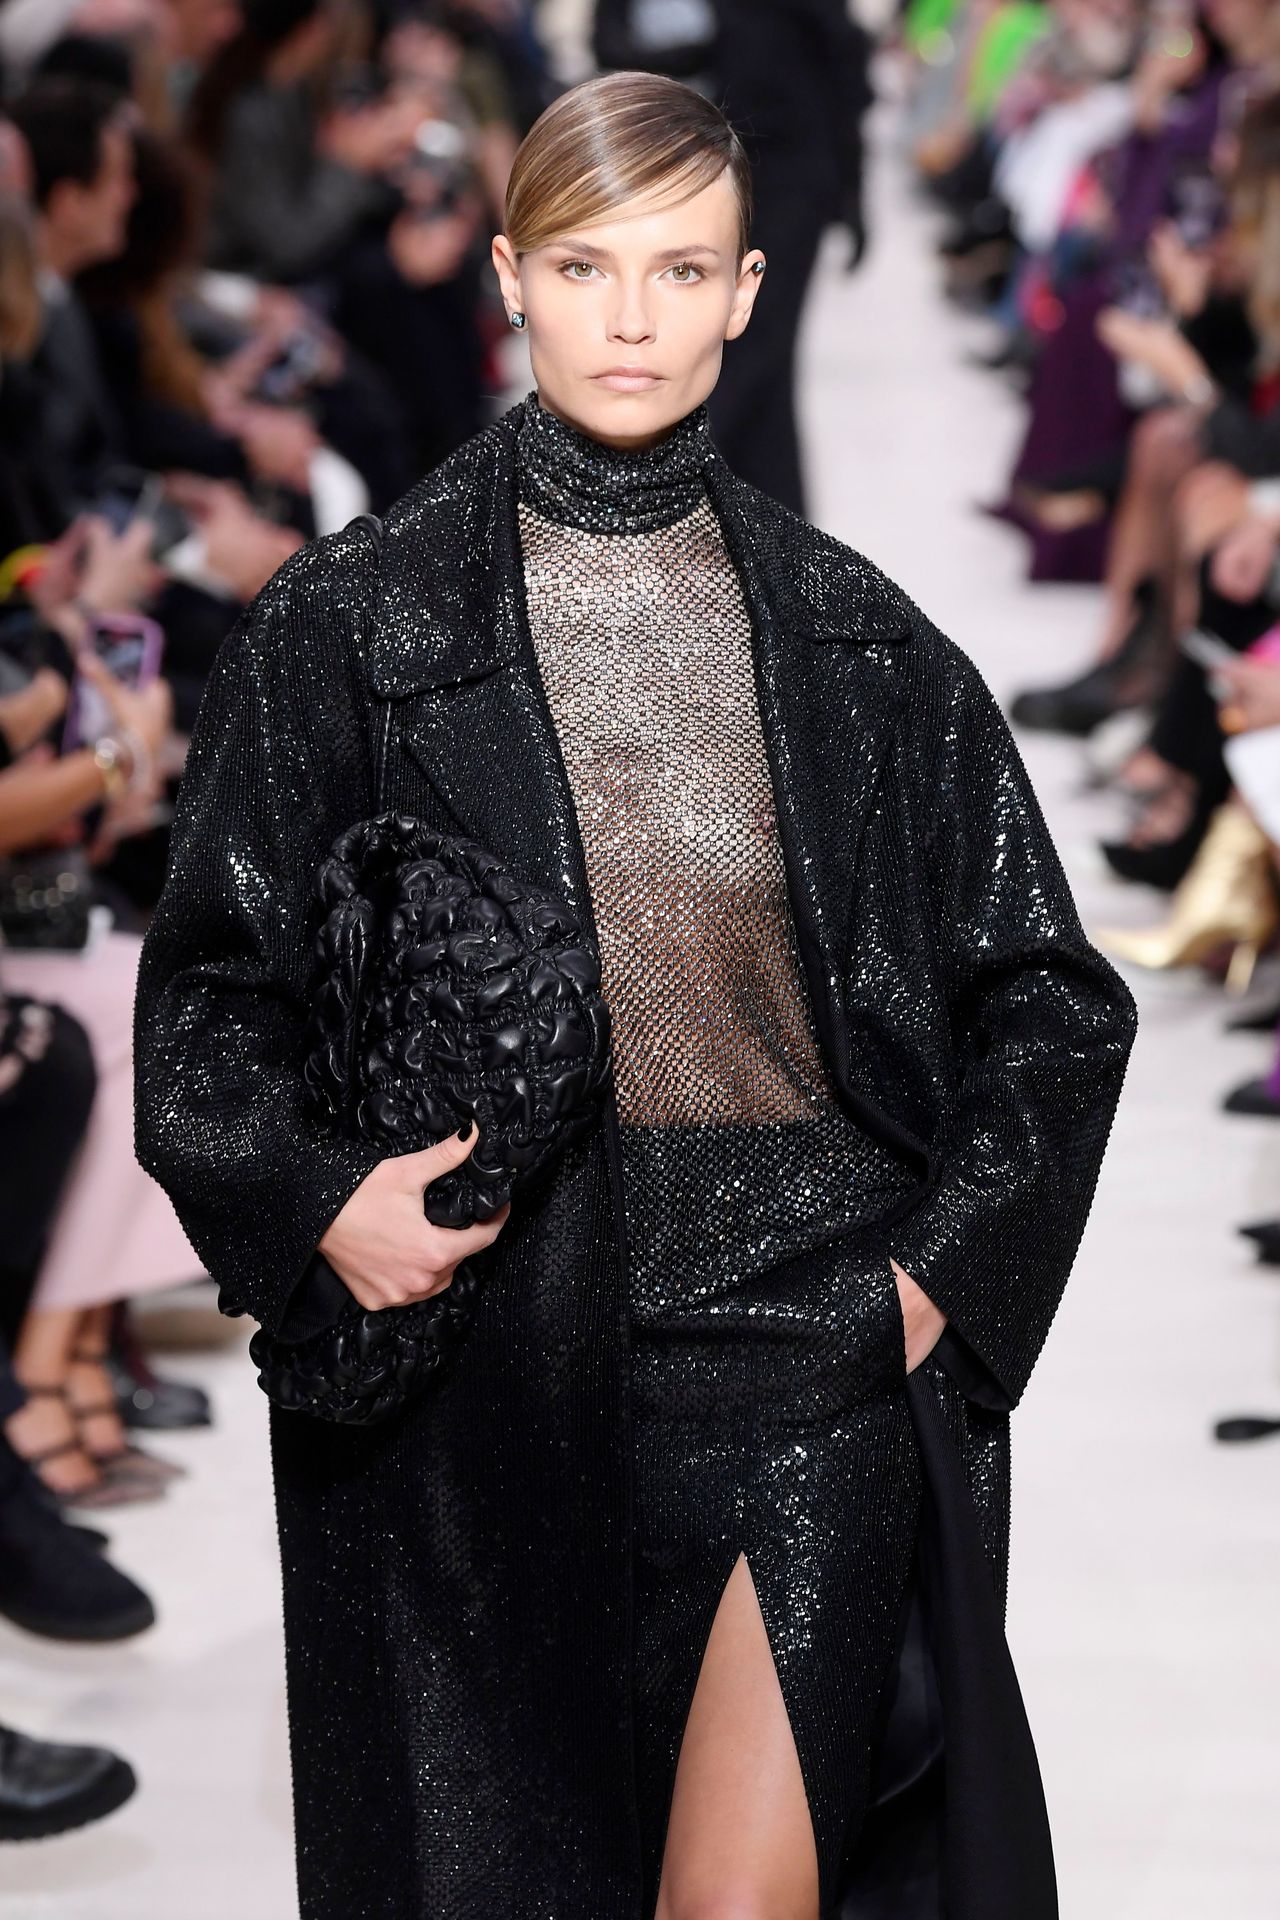 Natasha Poly Walks in a See Through Top on the Runway for the Valentino Show (8 Photos + GIF)